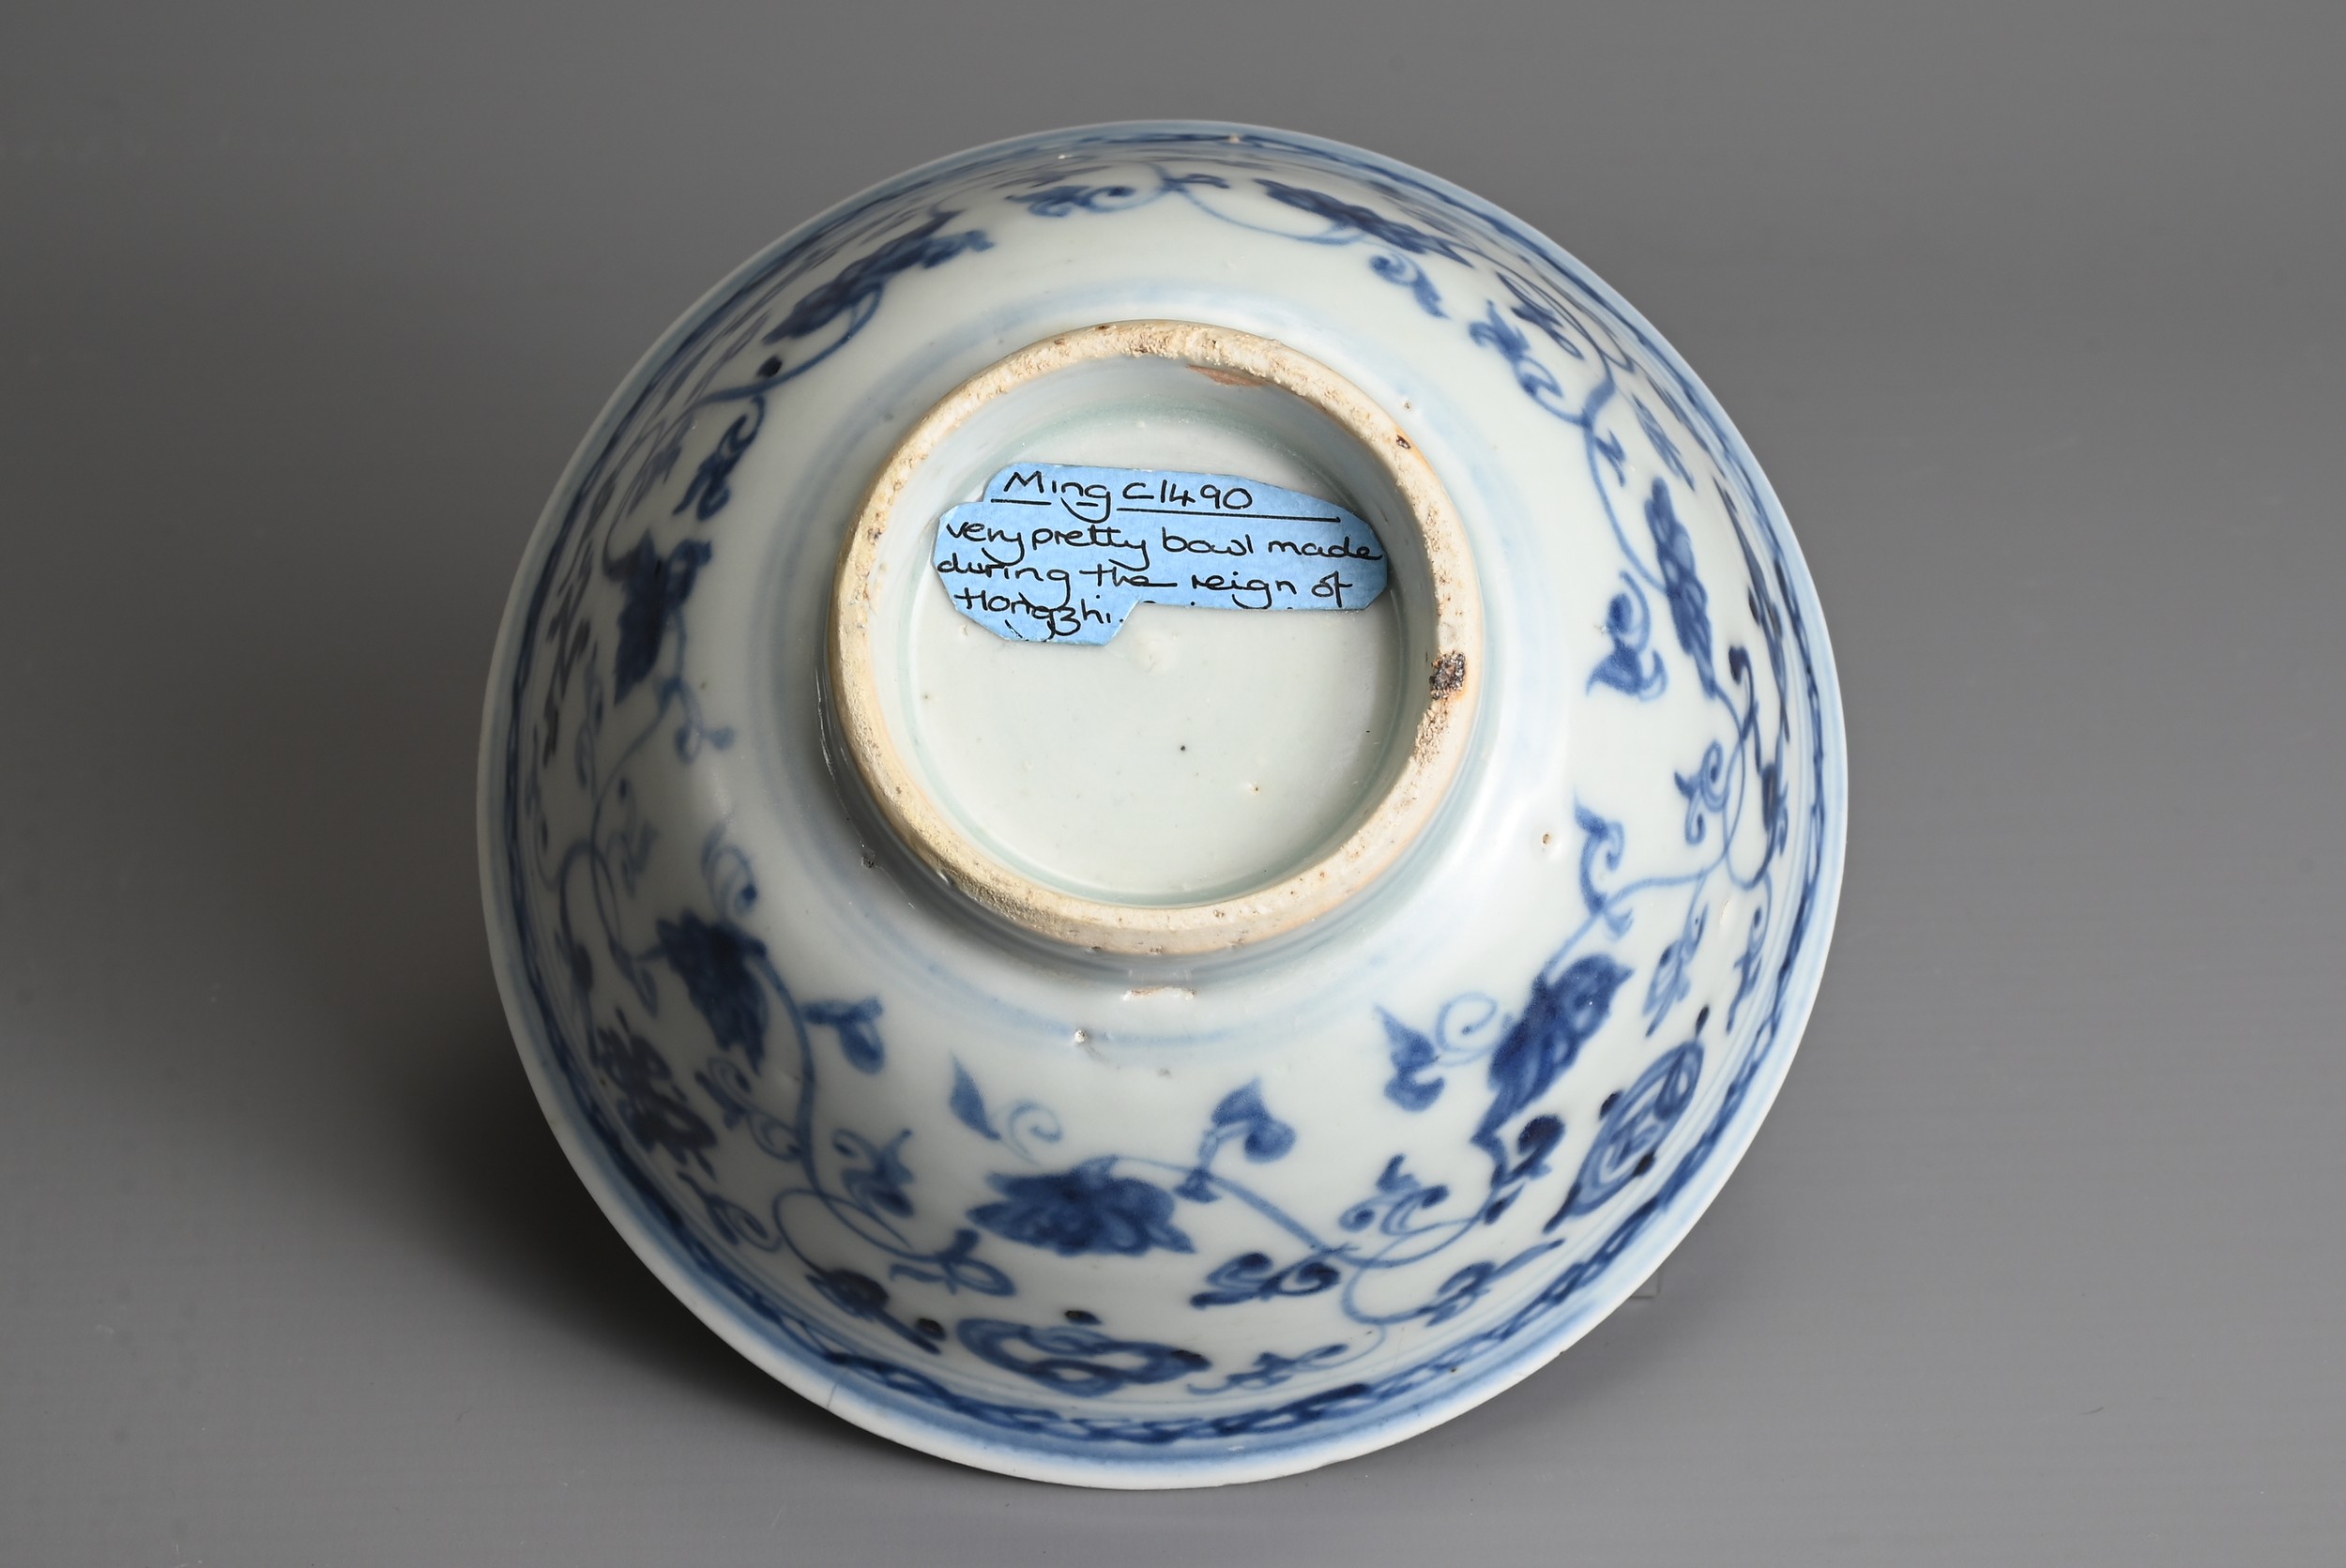 A CHINESE BLUE AND WHITE PORCELAIN BOWL, MING DYNASTY. Decorated with lotus scrolls and Buddhist - Image 6 of 7